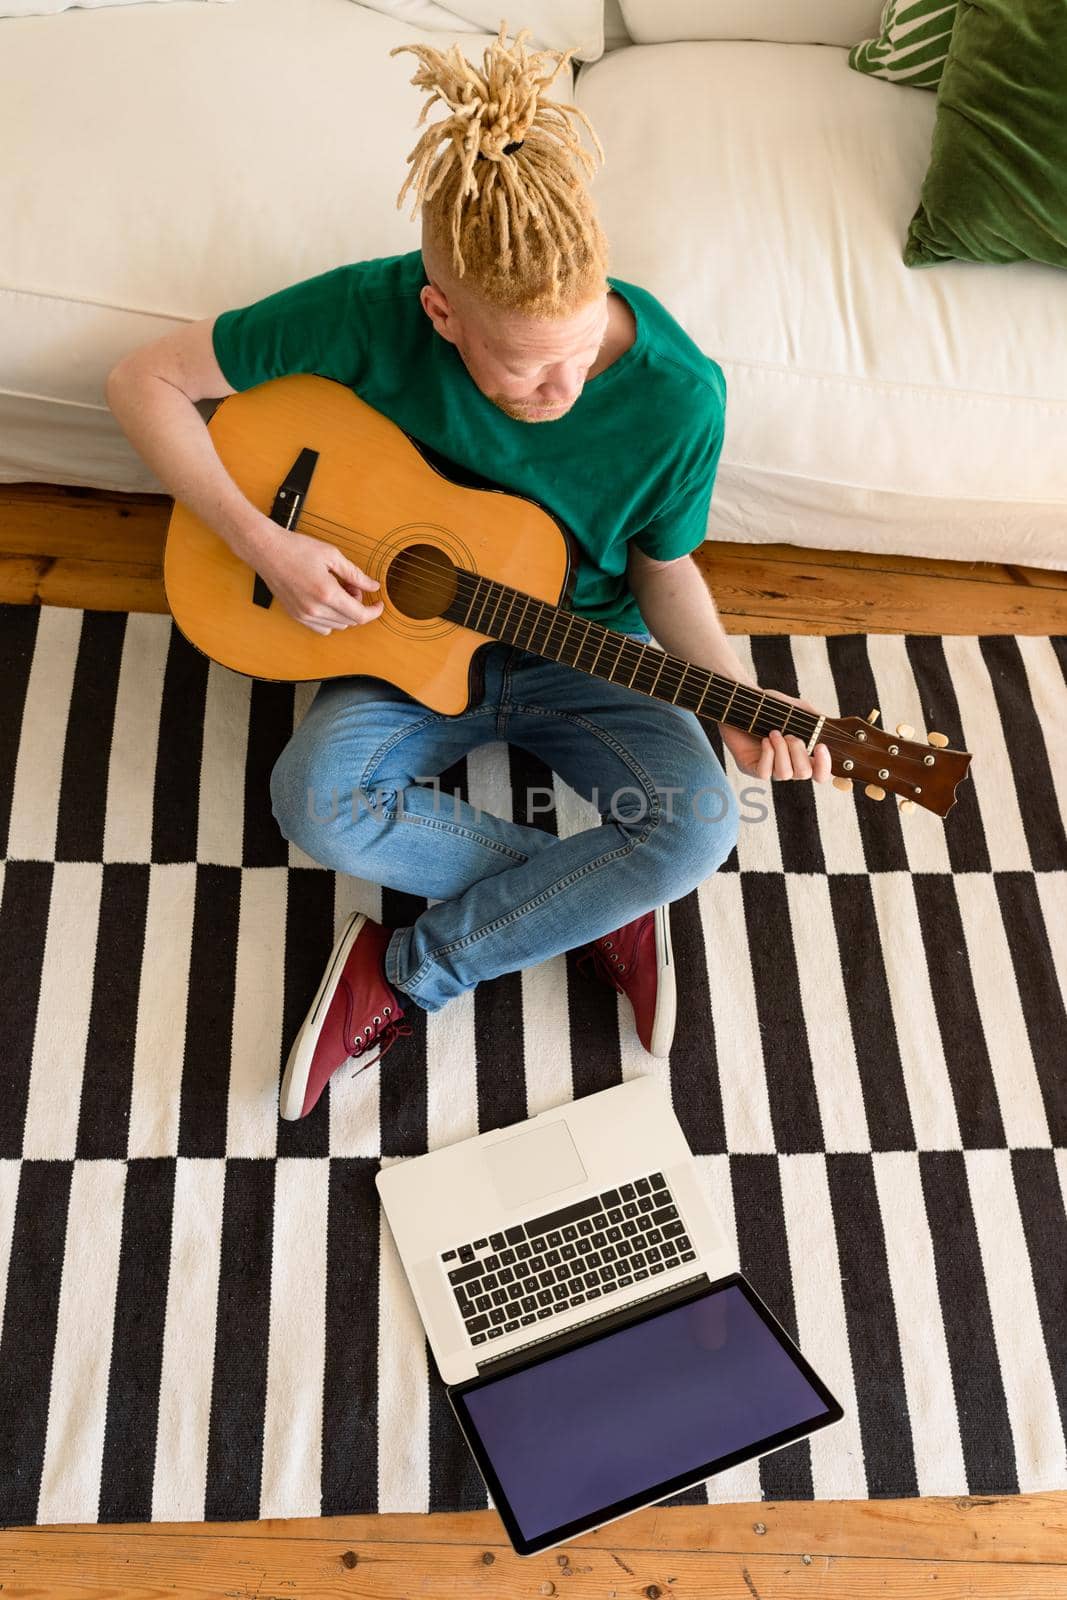 Albino african american man in the living room playing guitar and using laptop. leisure time using technology, relaxing at home.